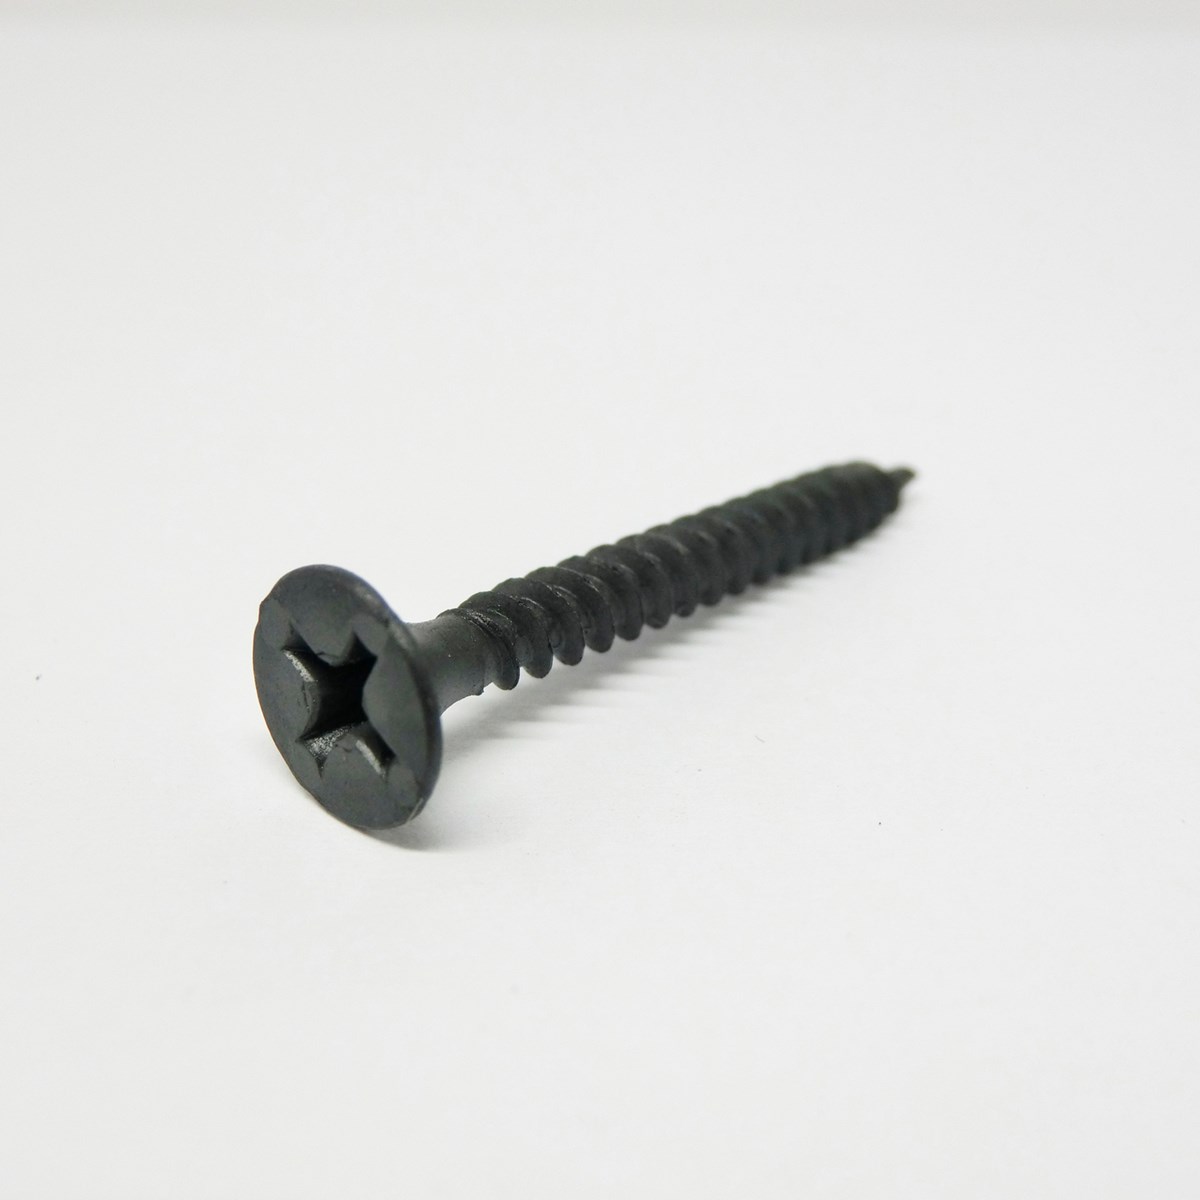 ACE 100106ACE Screw, #6 Thread, 1-1/4 in L, Fine Thread, Bugle Head, Phillips Drive, Sharp Point, Steel, Black Phosphate - 1